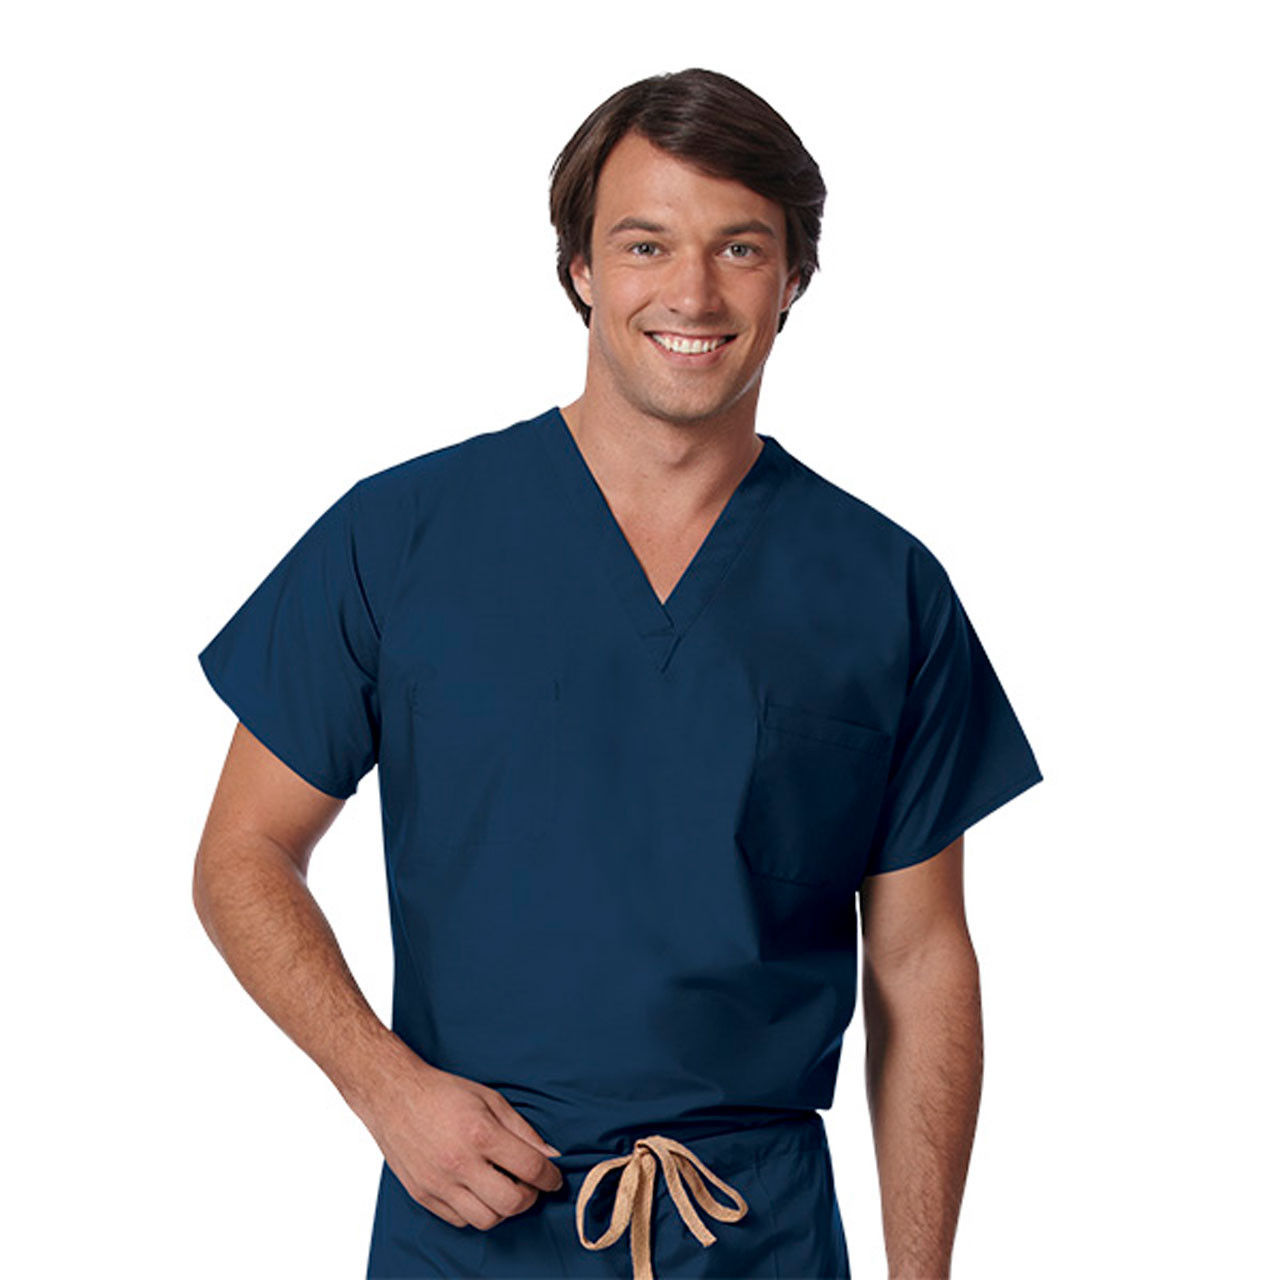 Is the material of the navy surgical scrubs by Fashion Seal comfortable?